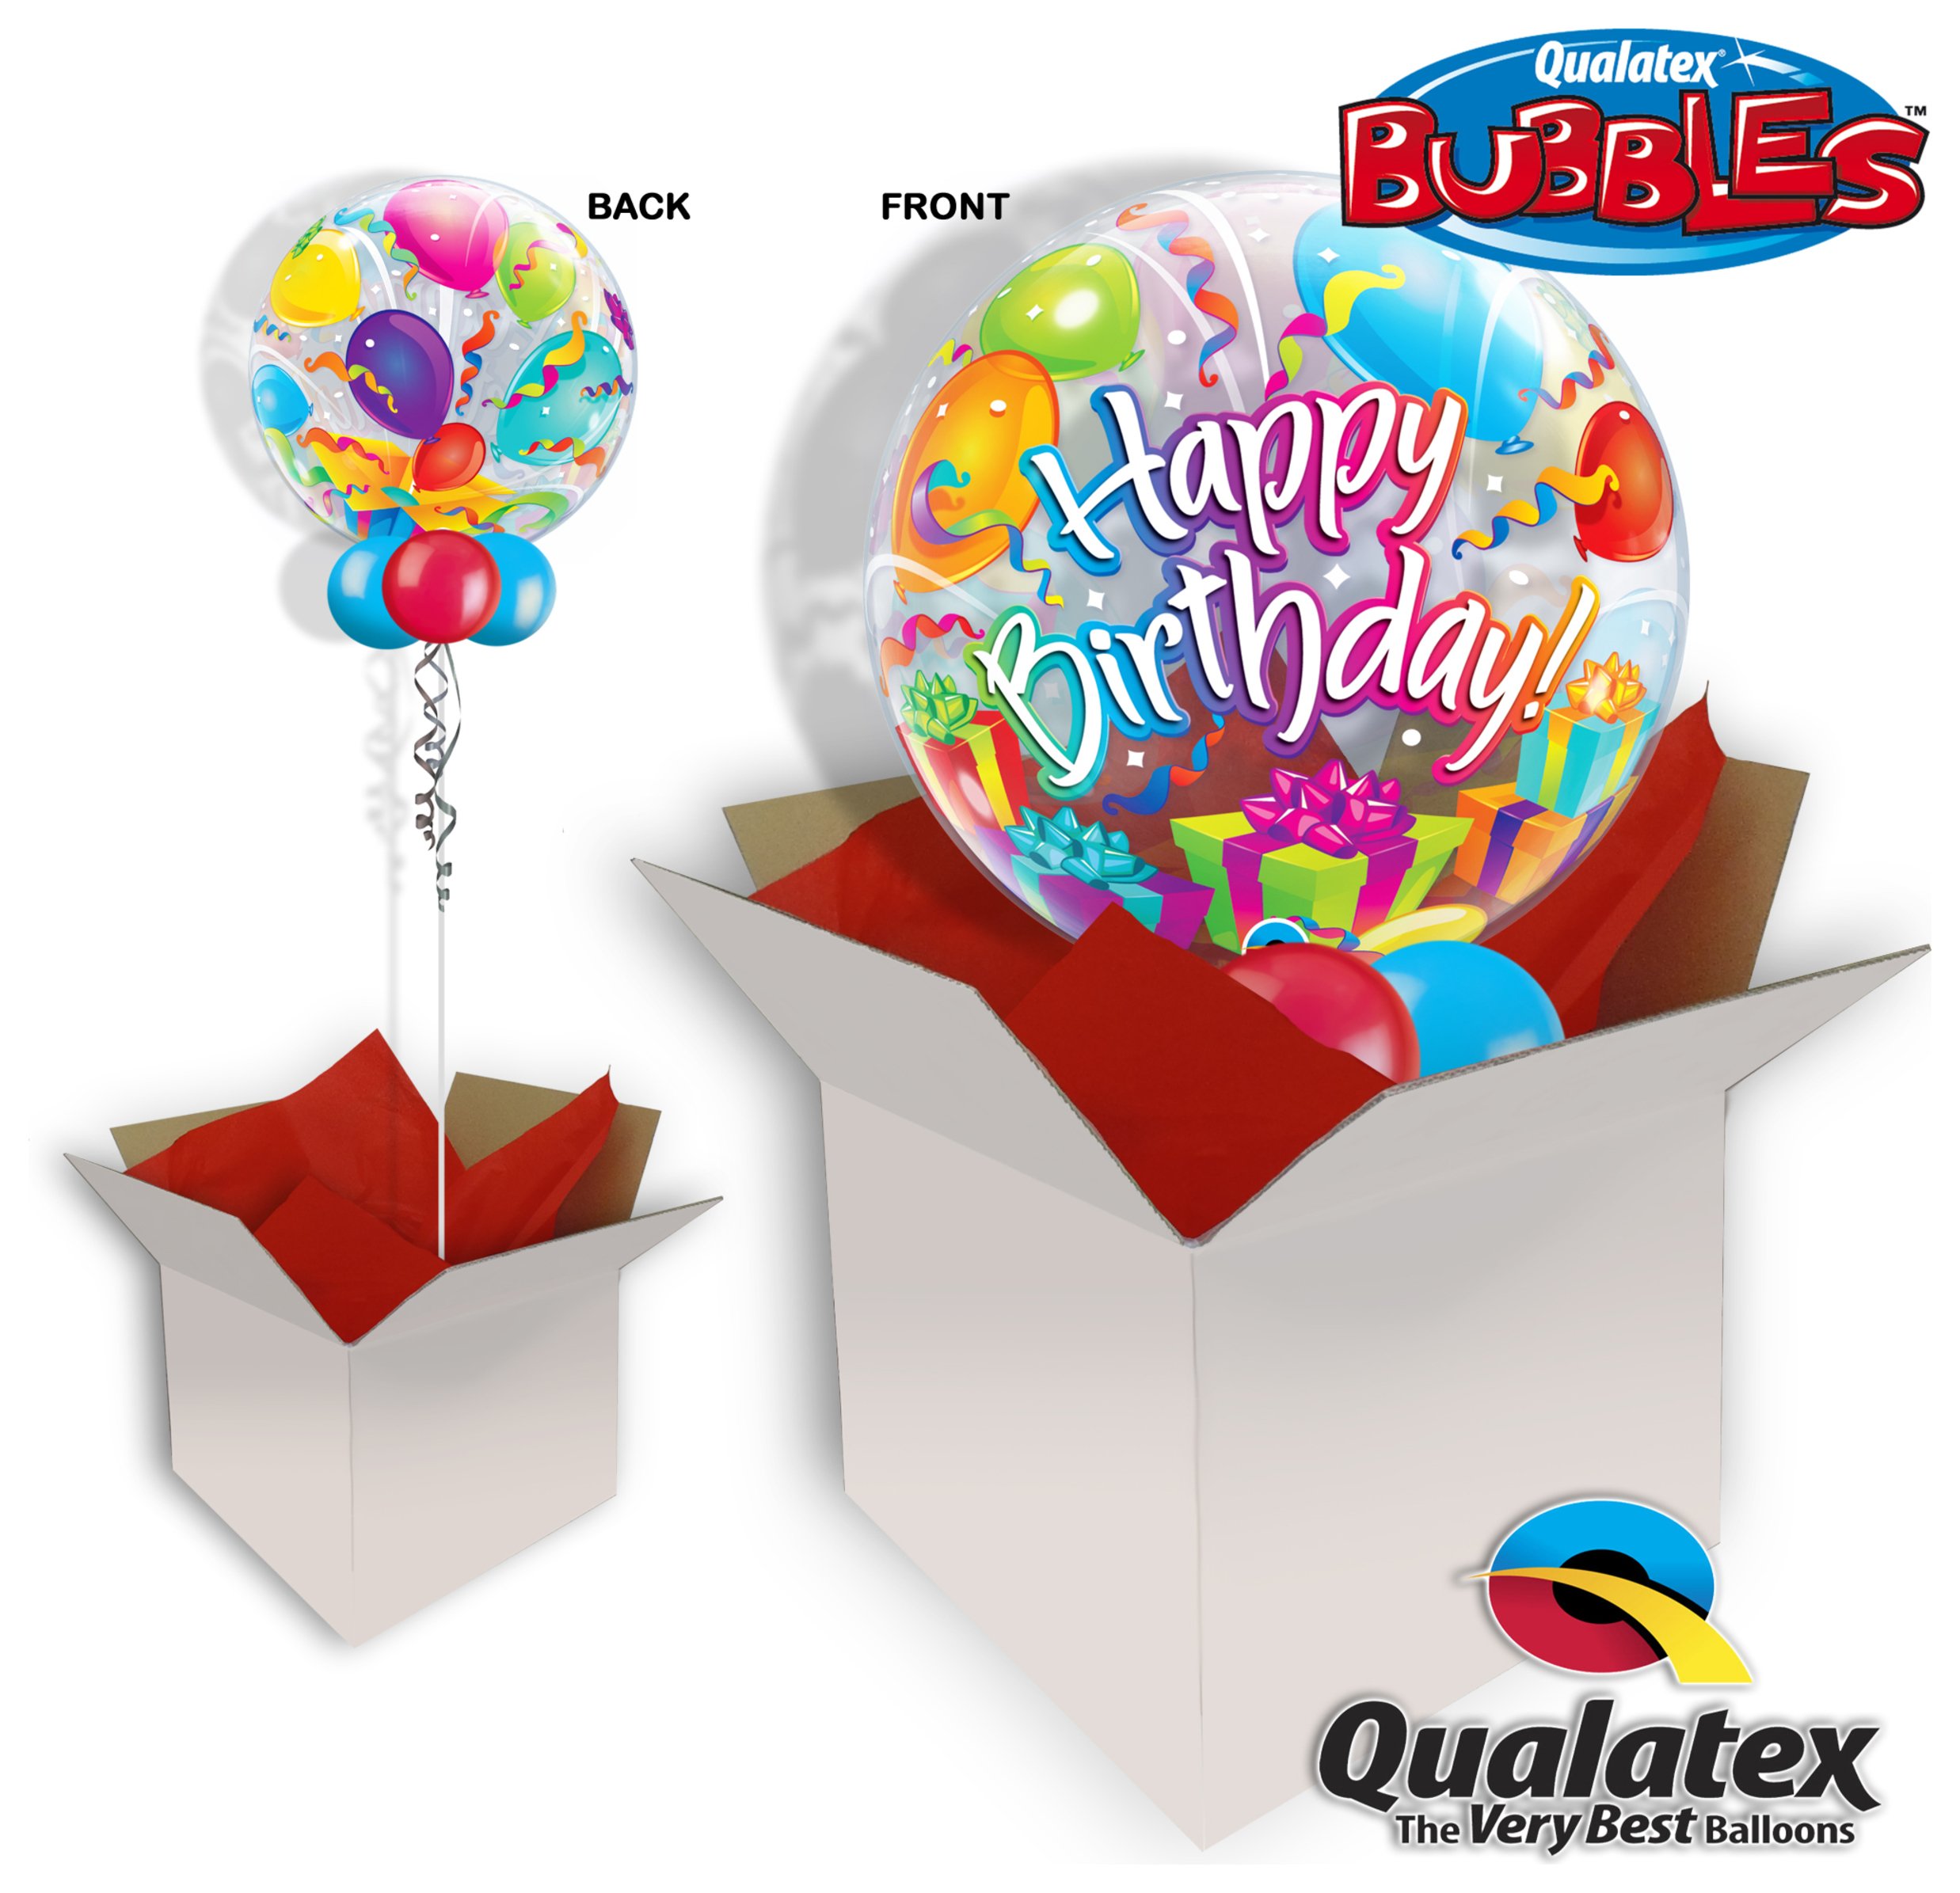 Birthday Surprise 22 Inch Bubble Balloon In A Box